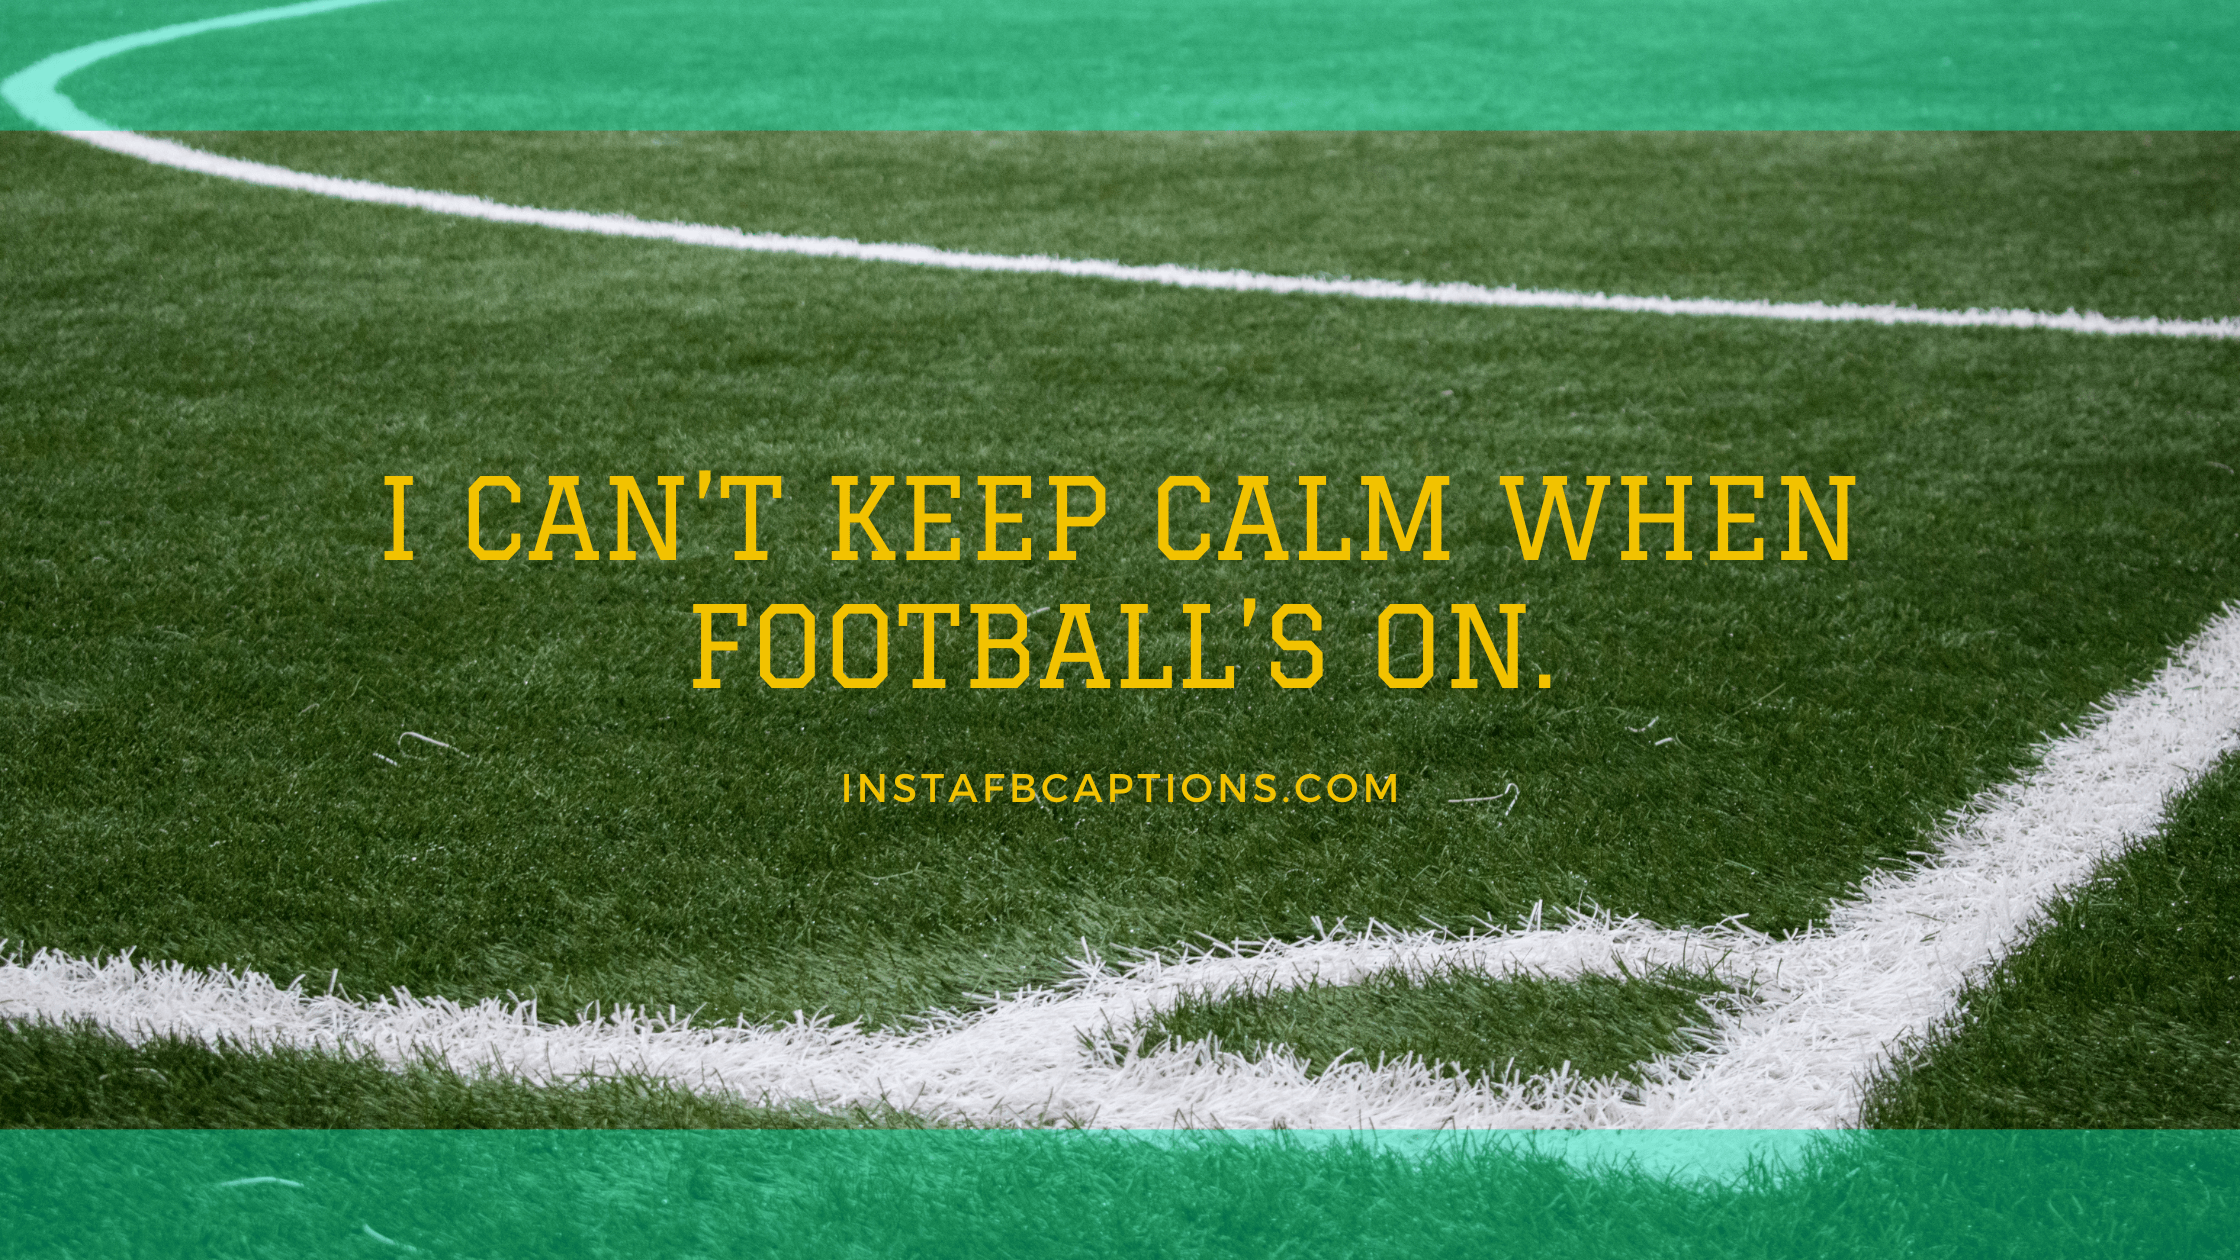 Football Captions For Pictures  - Football Captions for Pictures - [New] FOOTBALL Captions Quotes for Instagram in 2023